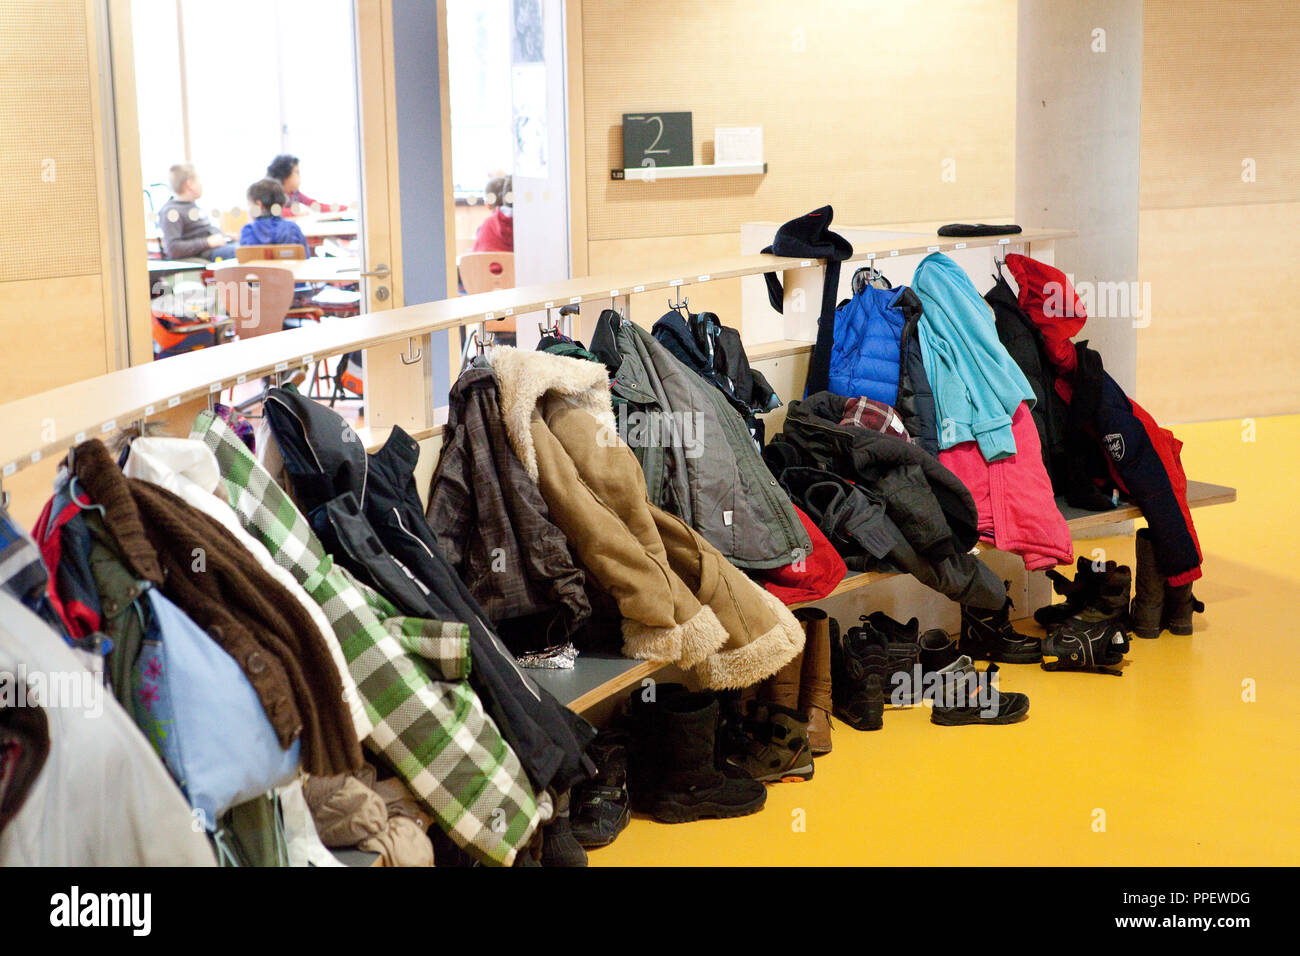 School in Motion: disabled access building of the Ernst-Barlach-schools of Stiftung Pfennigparade at Barlachstrasse 36-38 in Schwabing. In the picture, jackets in the cloakroom before a classroom Stock Photo